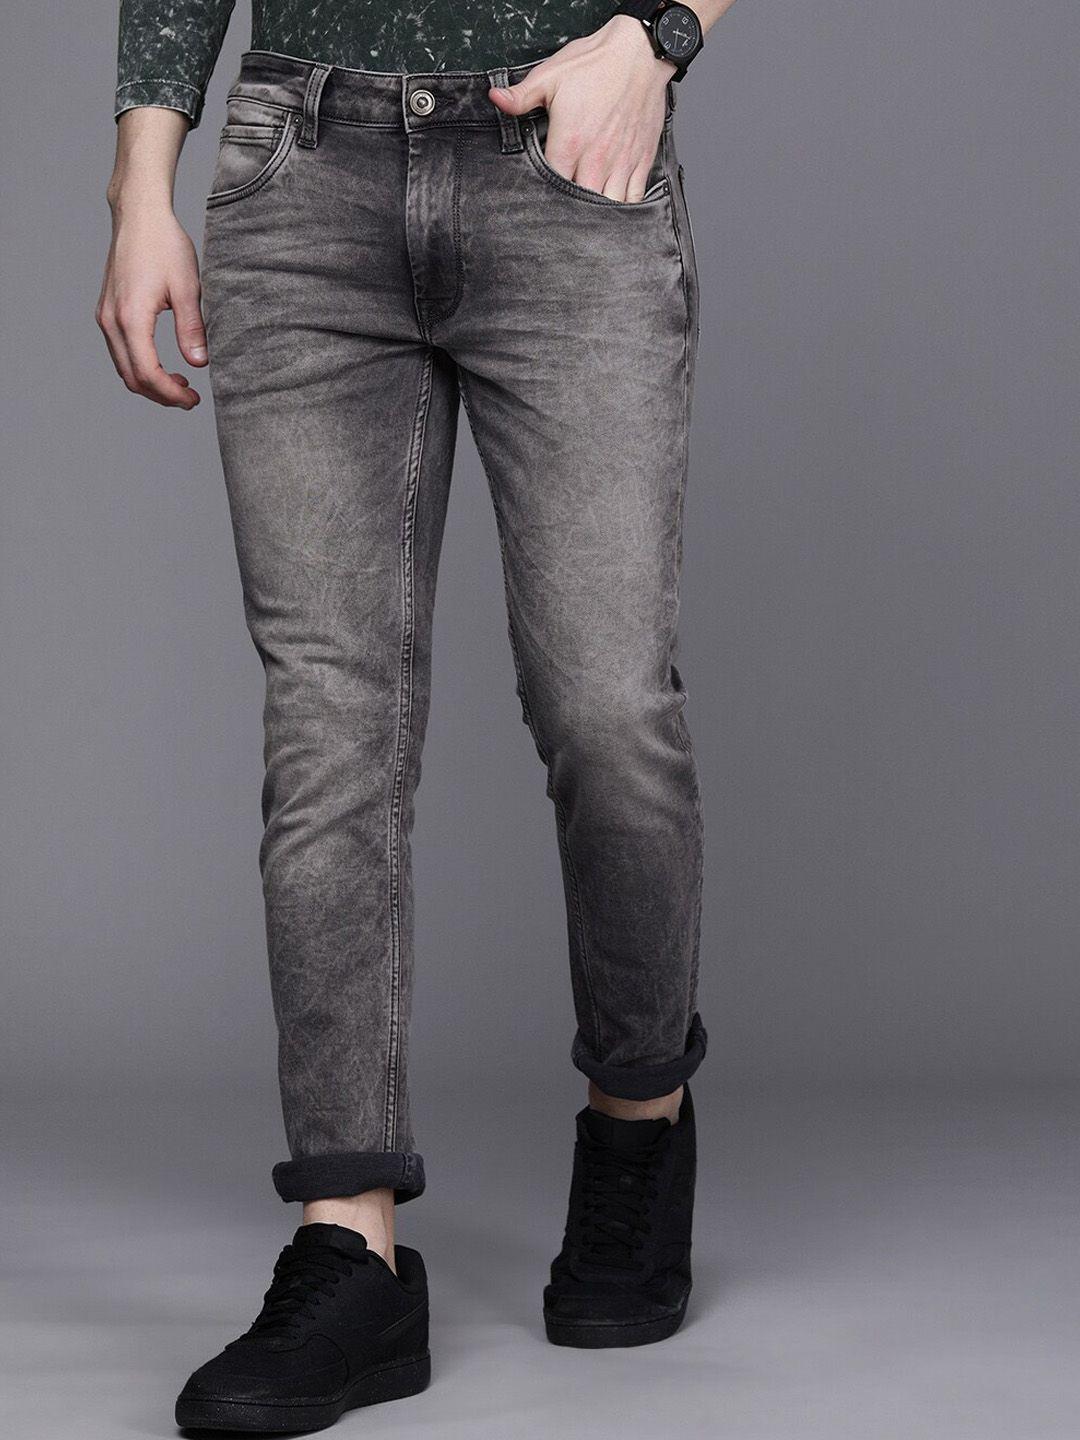 voi jeans men grey skinny fit heavy fade stretchable jeans